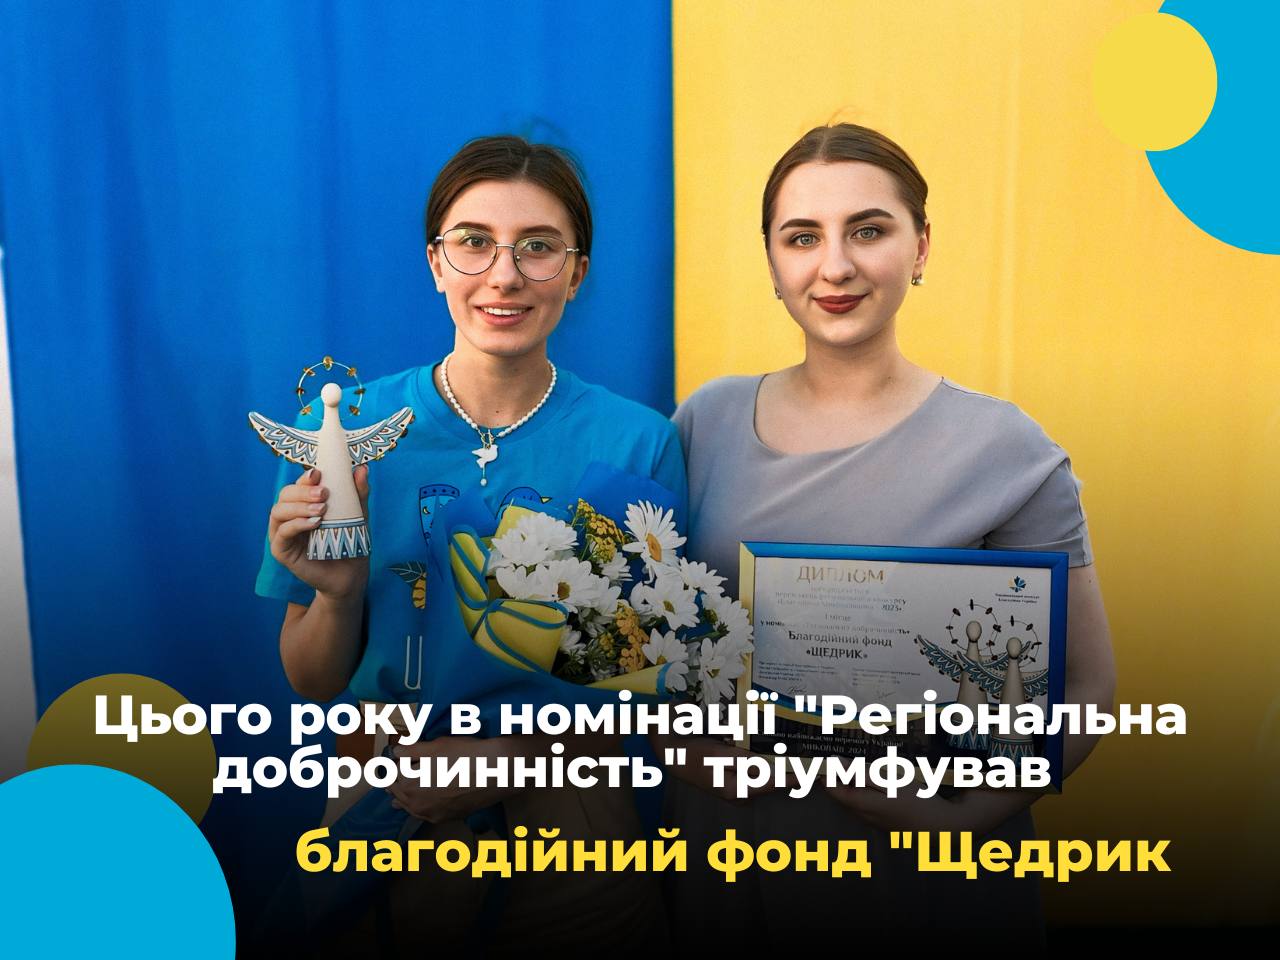 The “Shchedryk” Charitable Foundation won the “Regional Integrity” category at the “Charitable Ukraine” competition!